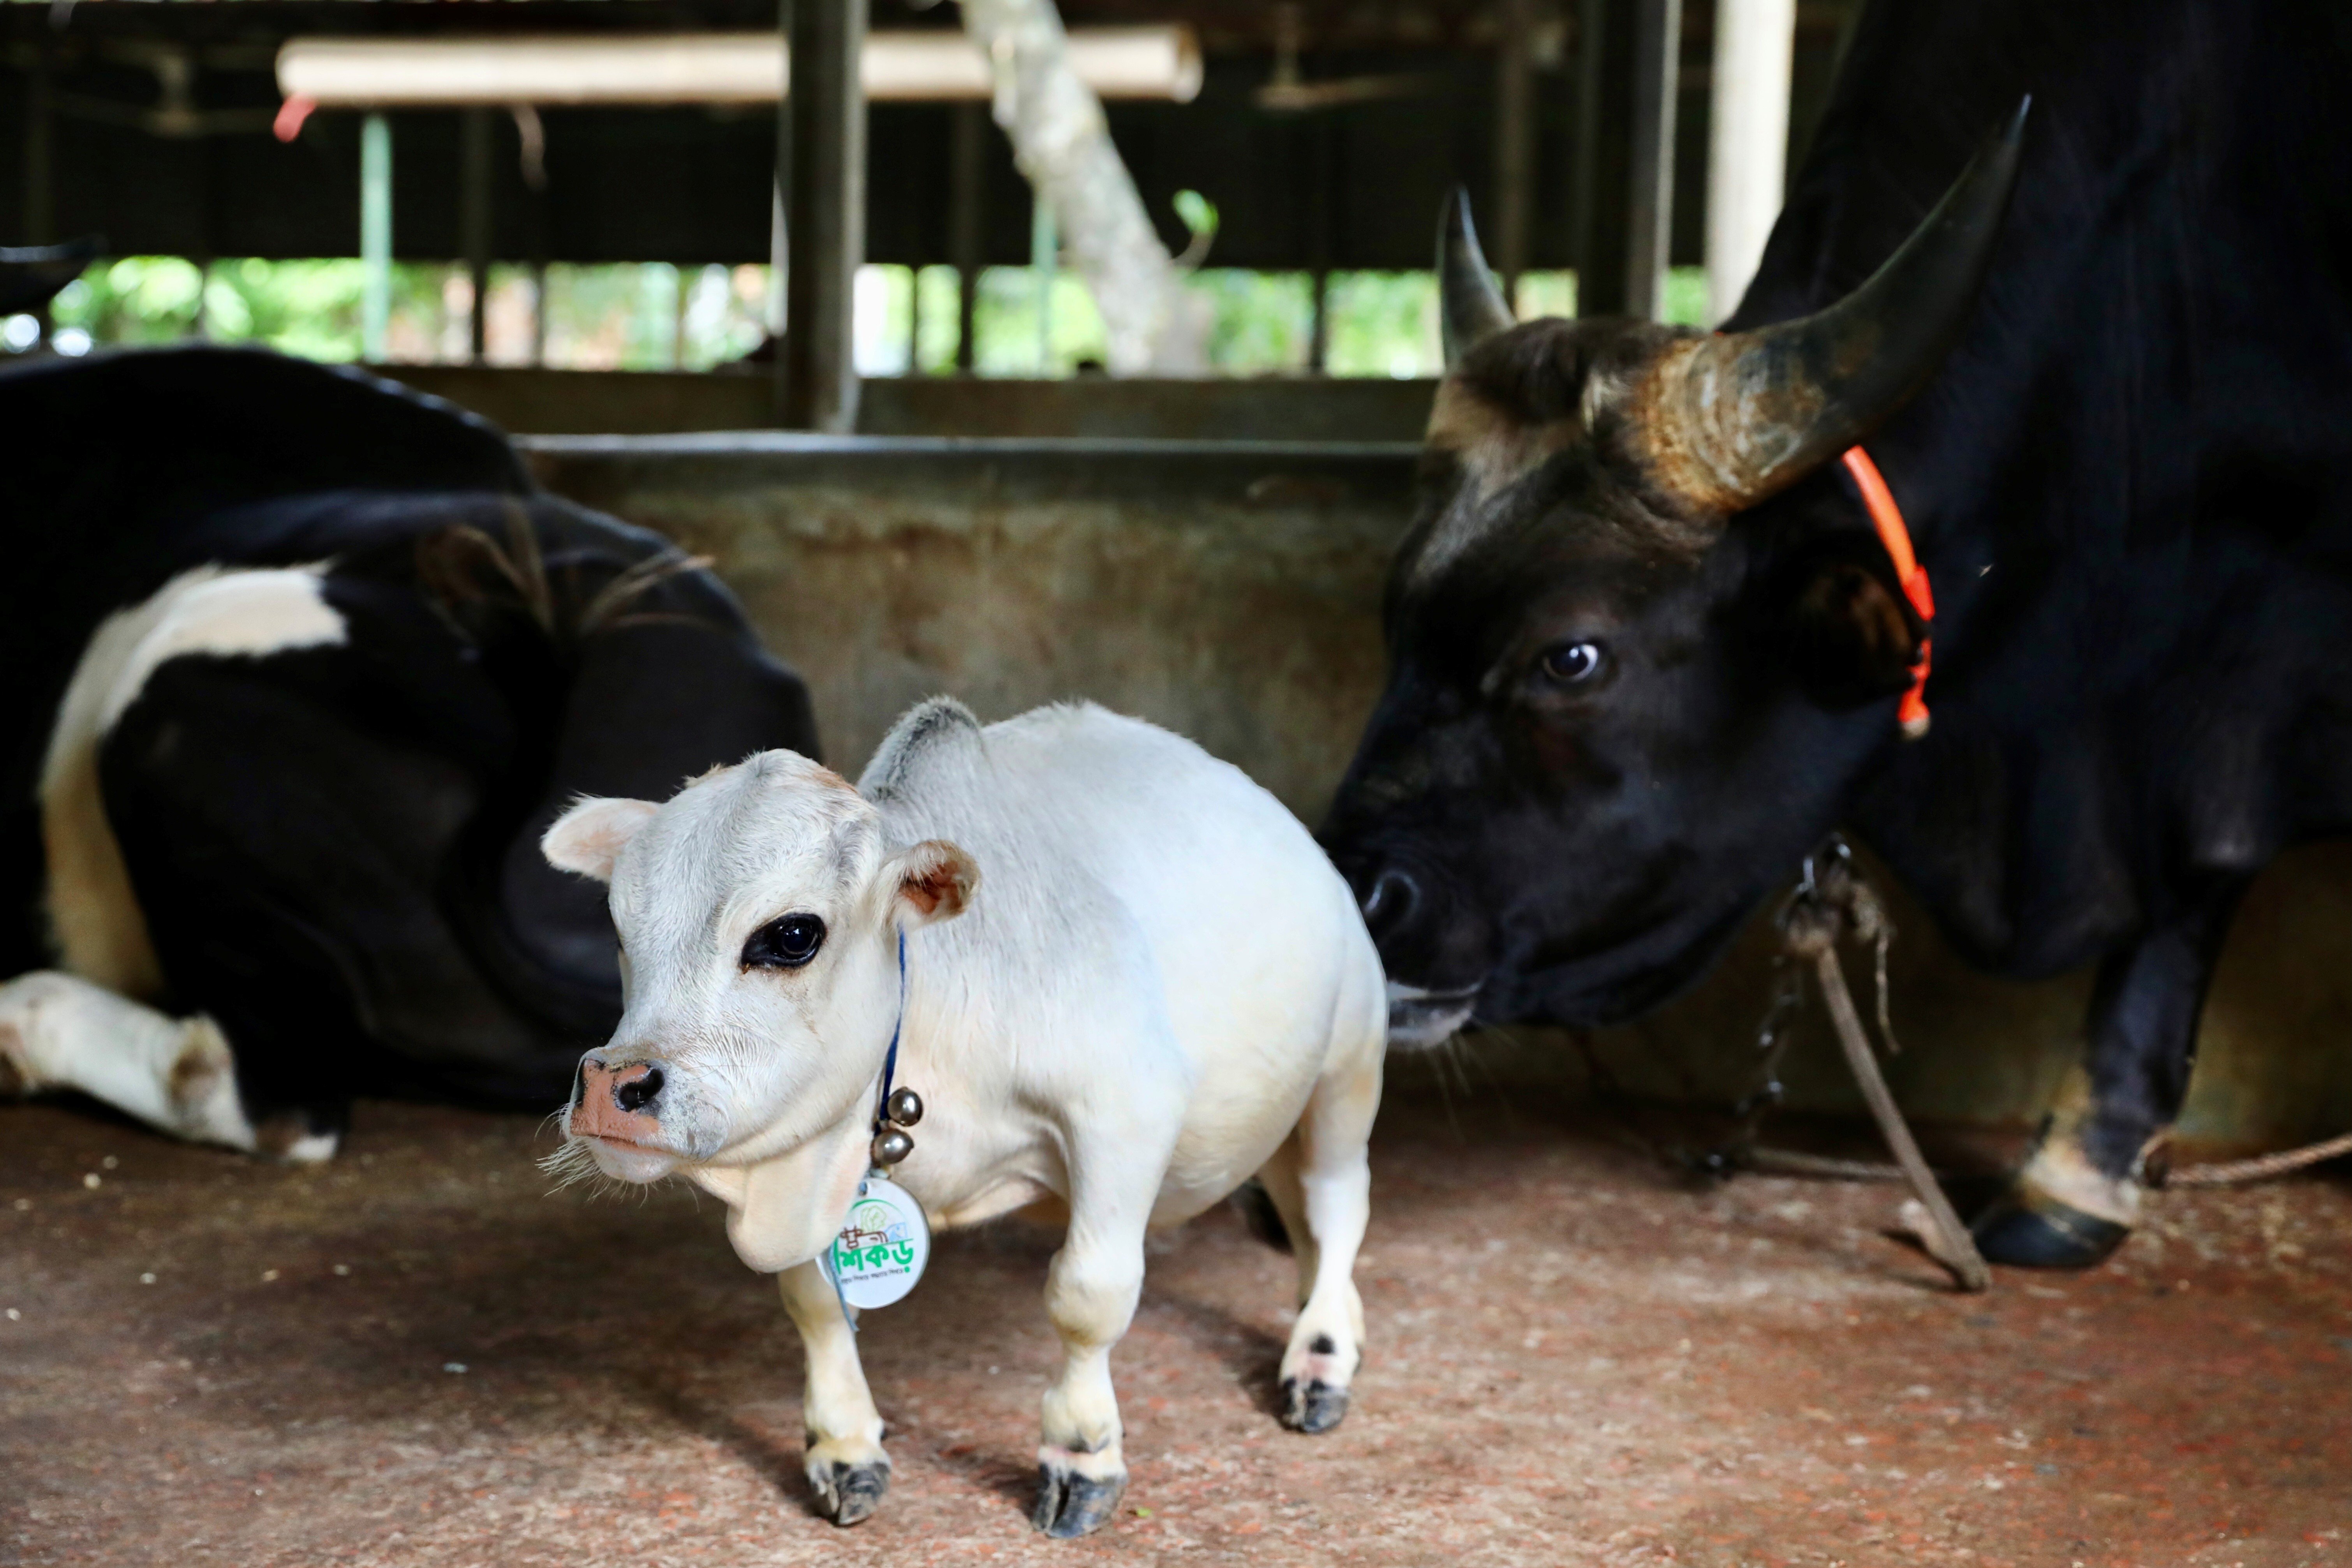 Meet Rani – at just 20 inches tall, she could be the world's smallest cow |  South China Morning Post